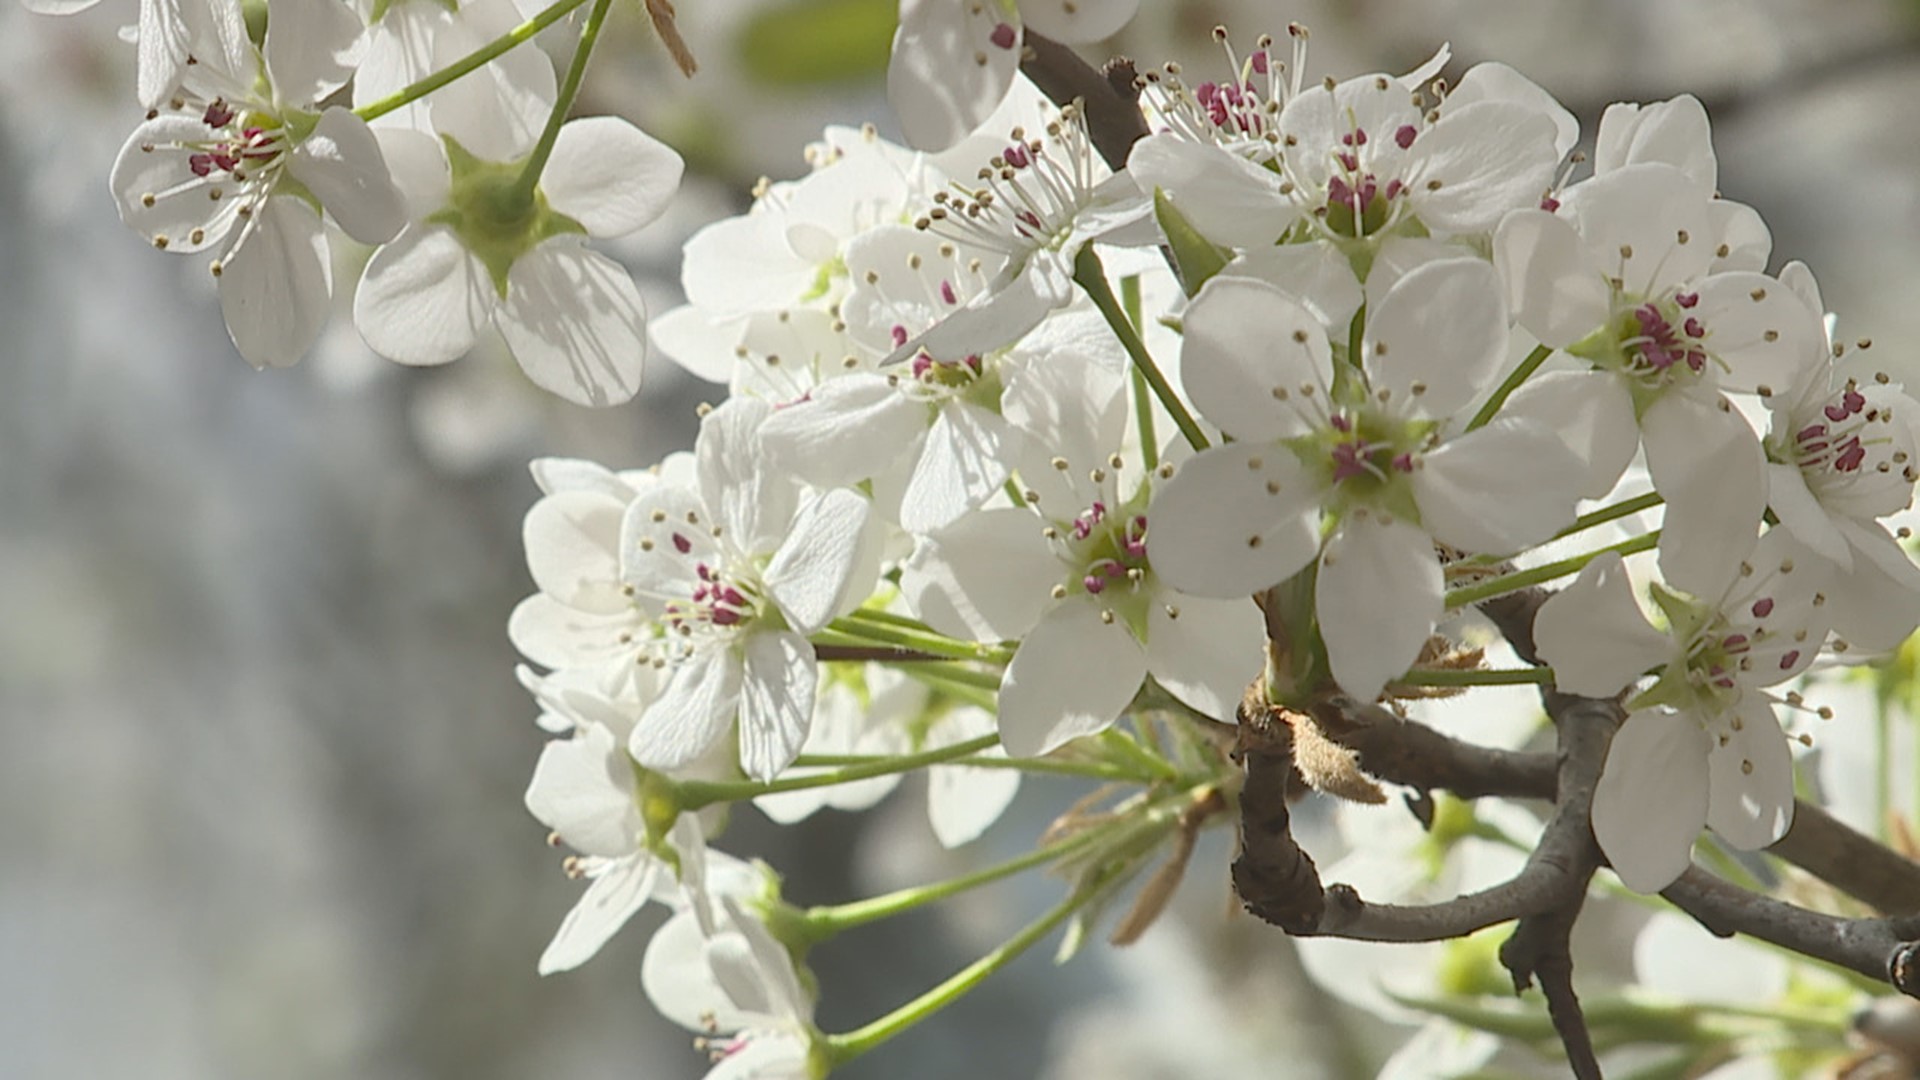 Bradford Pear trees are in full bloom in different parts of central Pennsylvania, but some might not know the risk they pose to the environment.